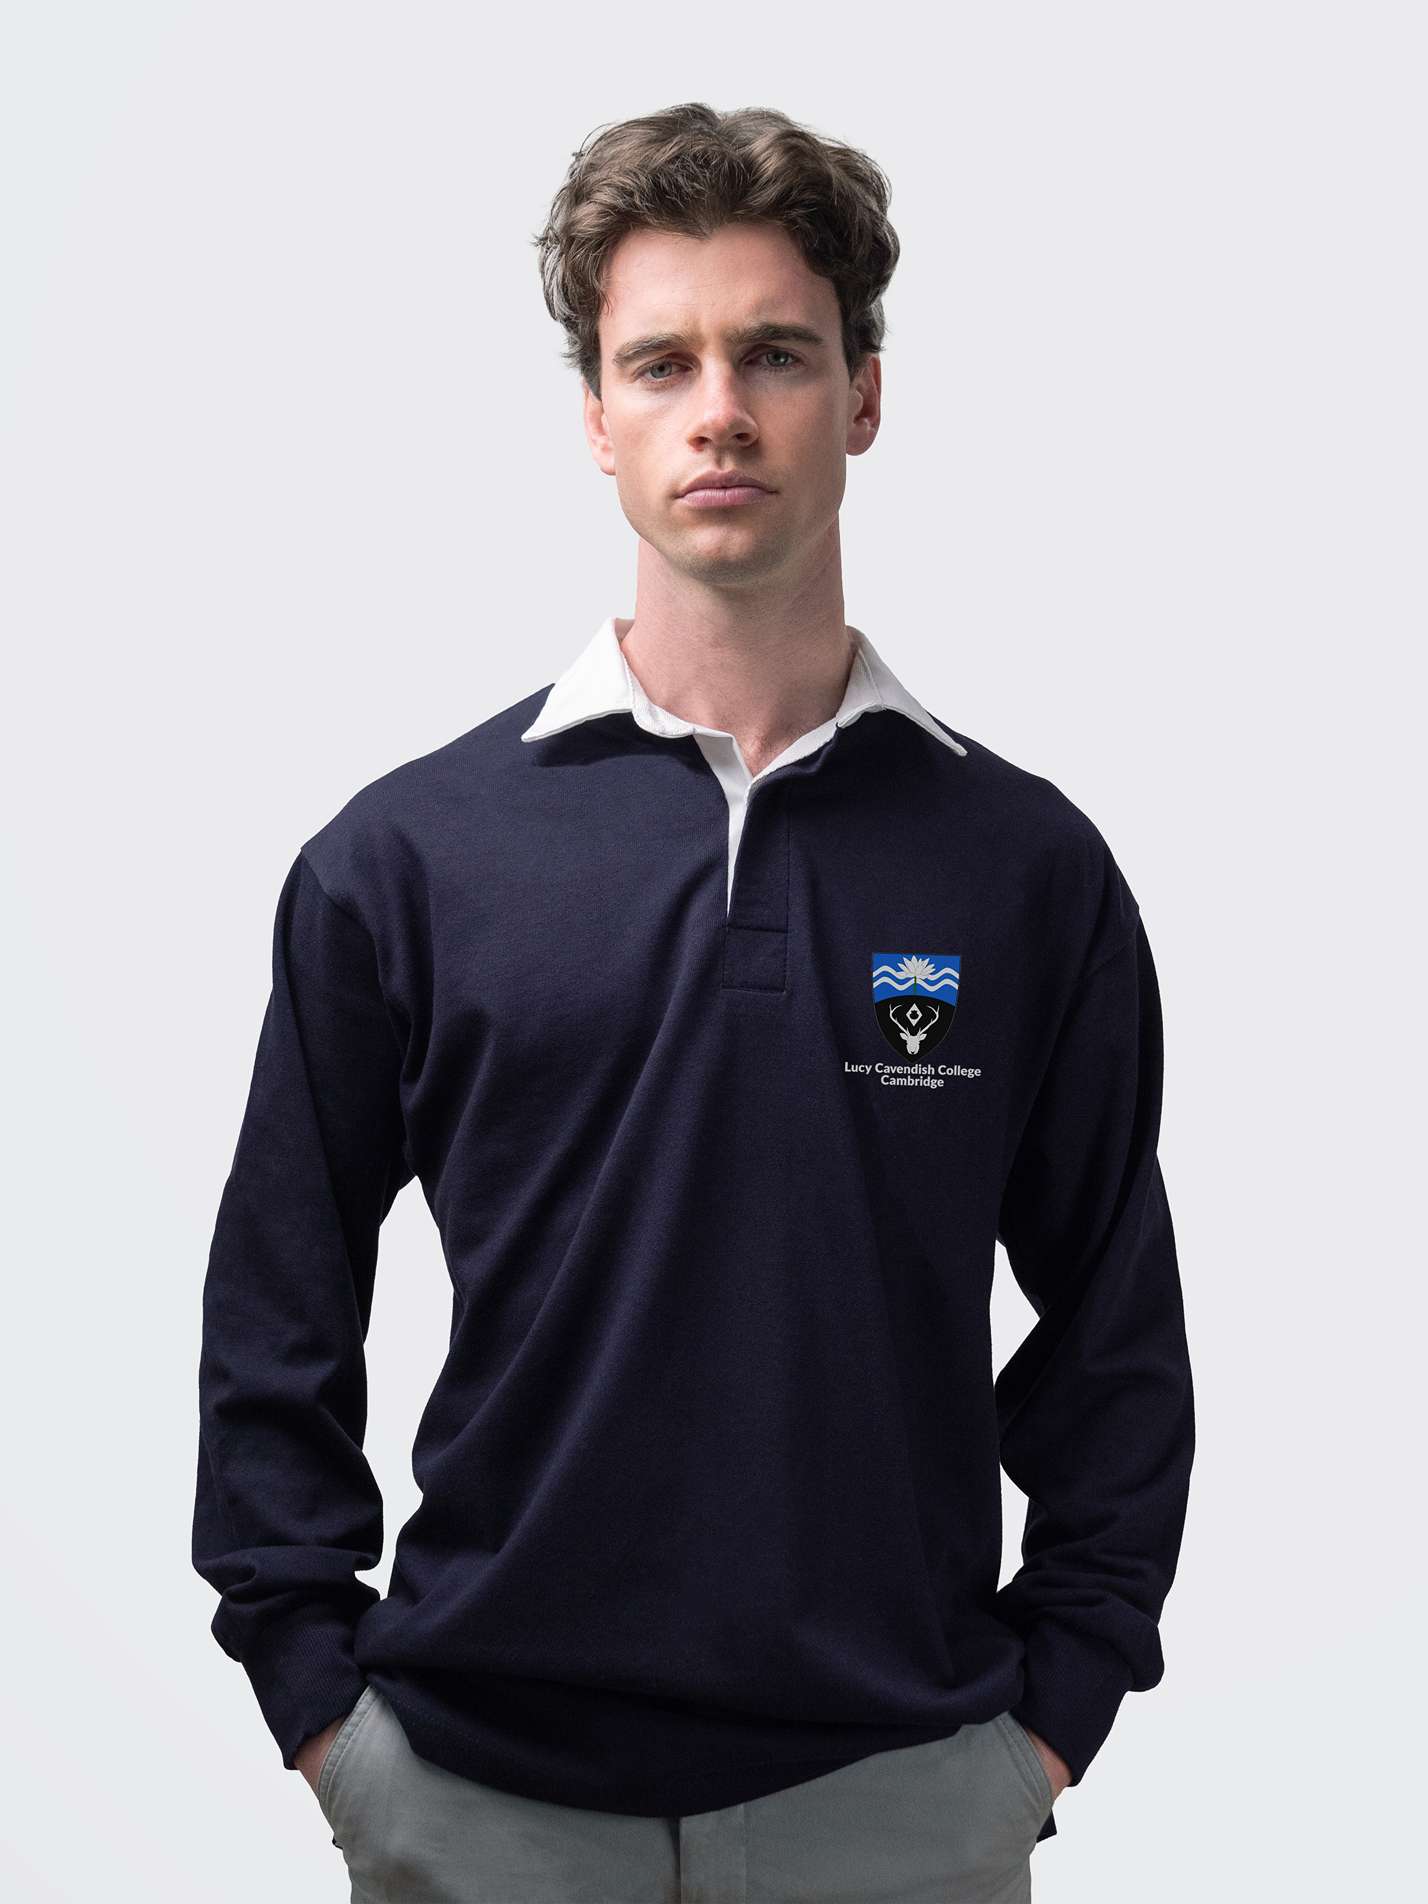 Lucy Cavendish student wearing an embroidered mens rugby shirt in navy